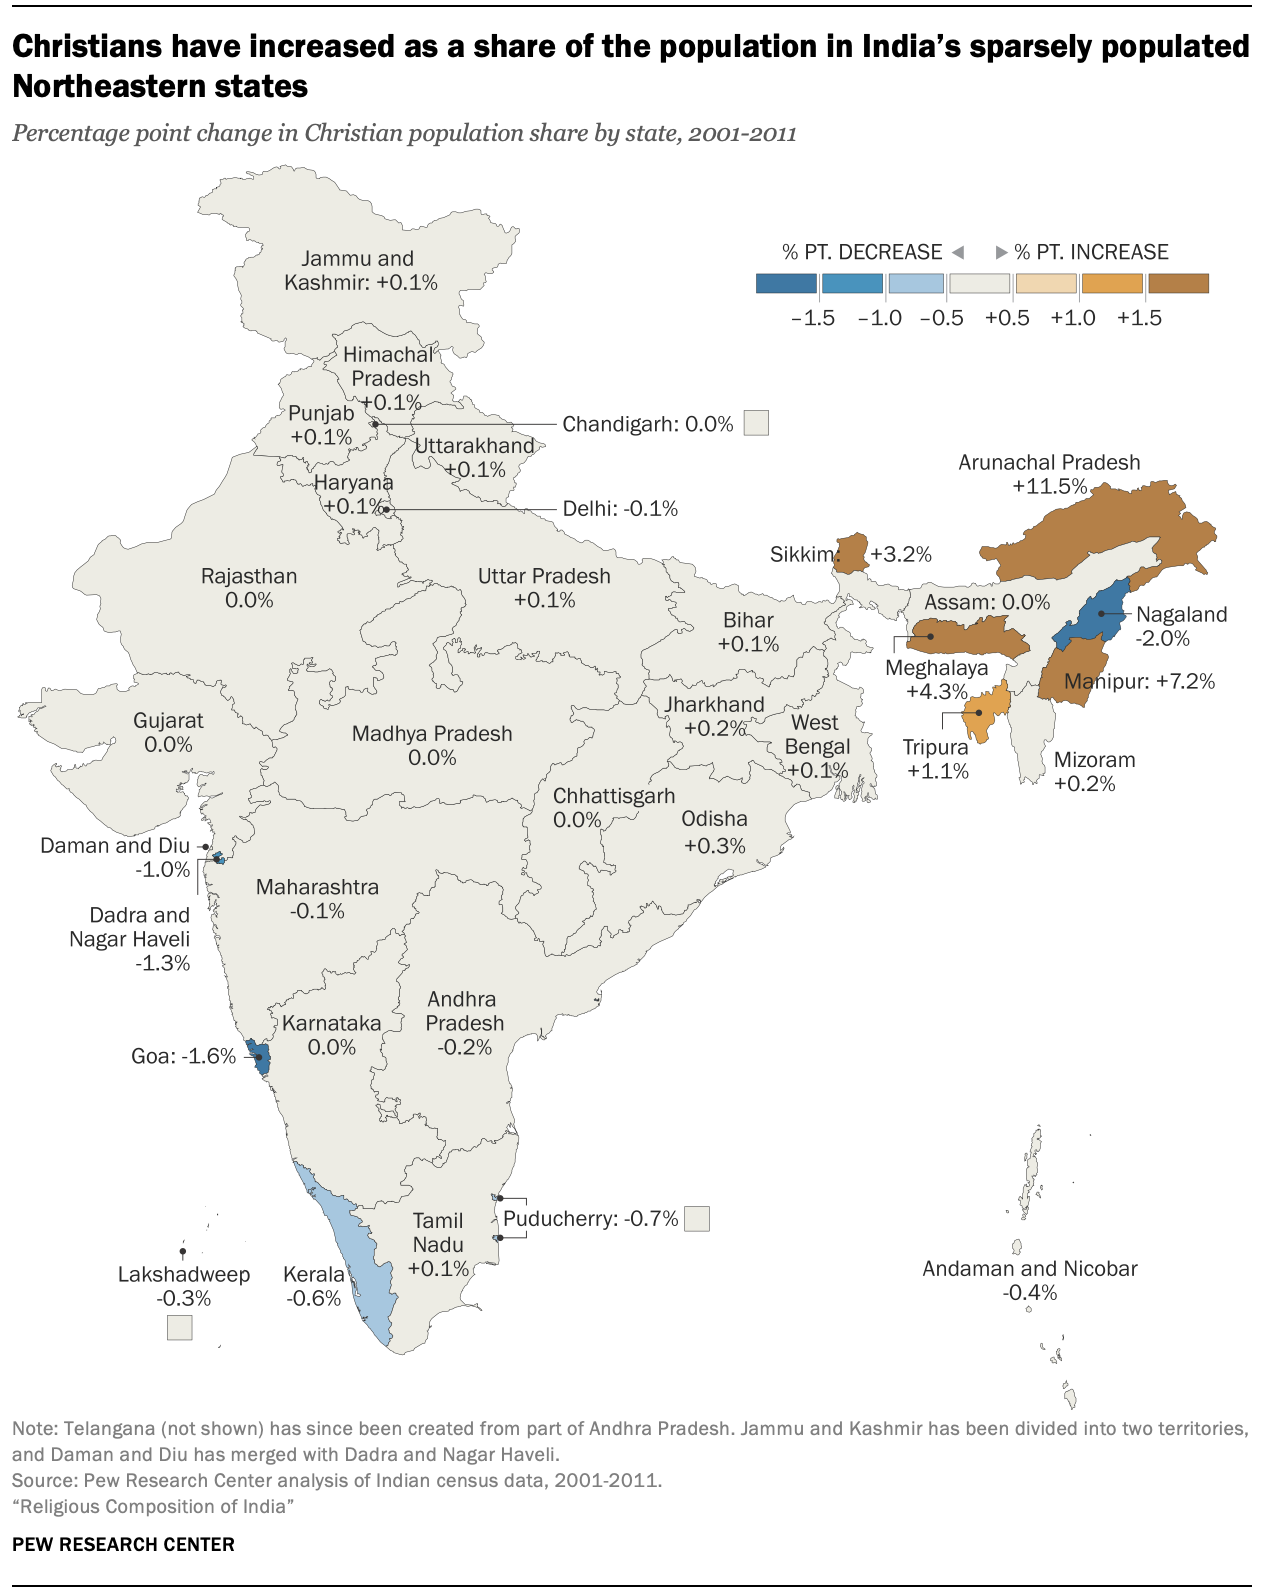 Christians have increased as a share of the population in India’s sparsely populated Northeastern states